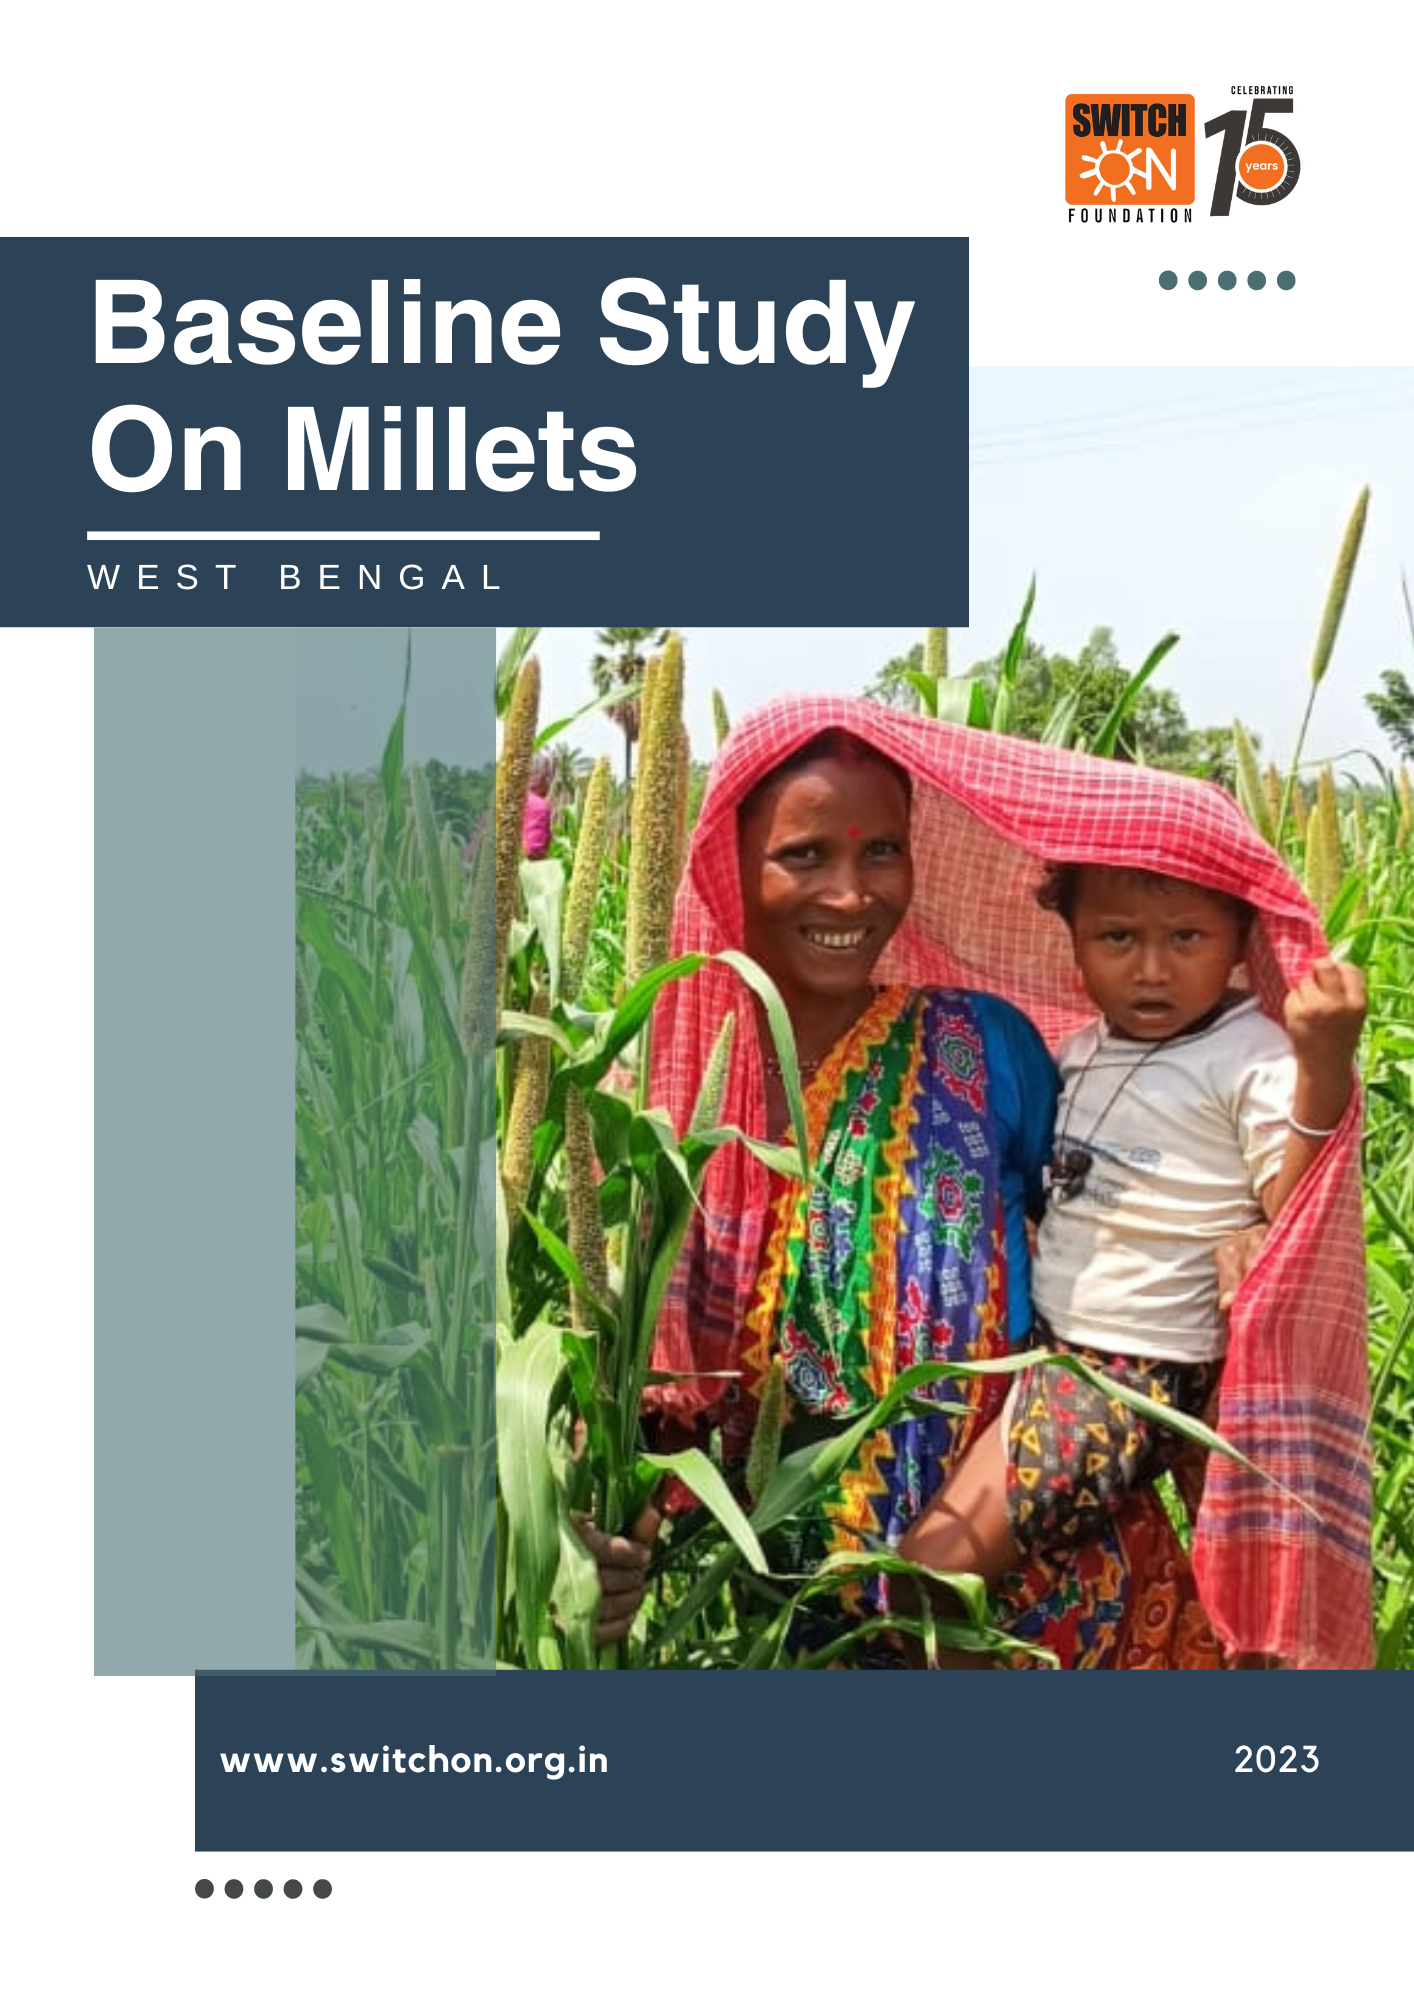 Baseline Study of Millets in West Bengal